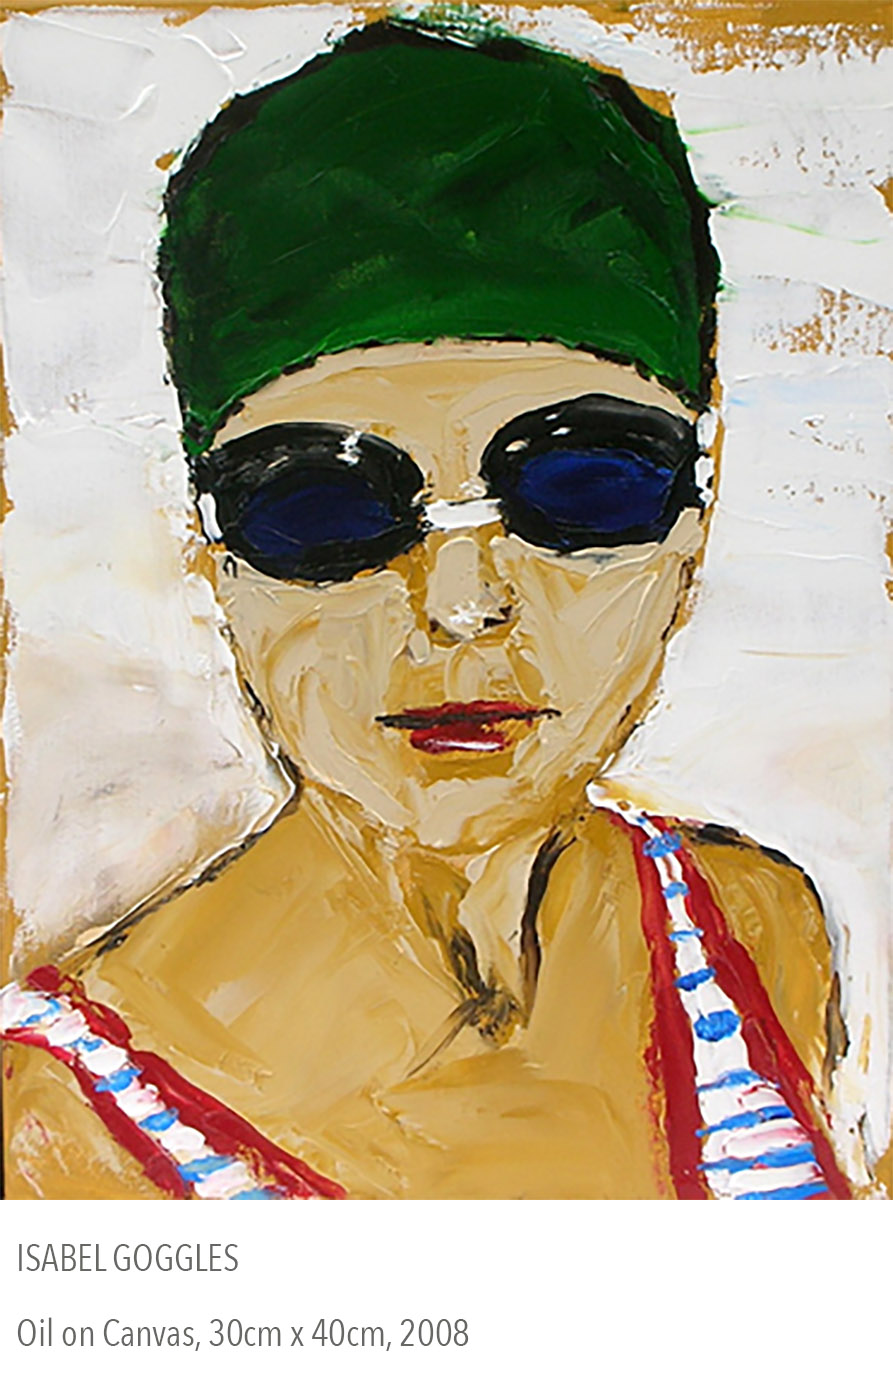 2008 oil painting called Isabel Goggles